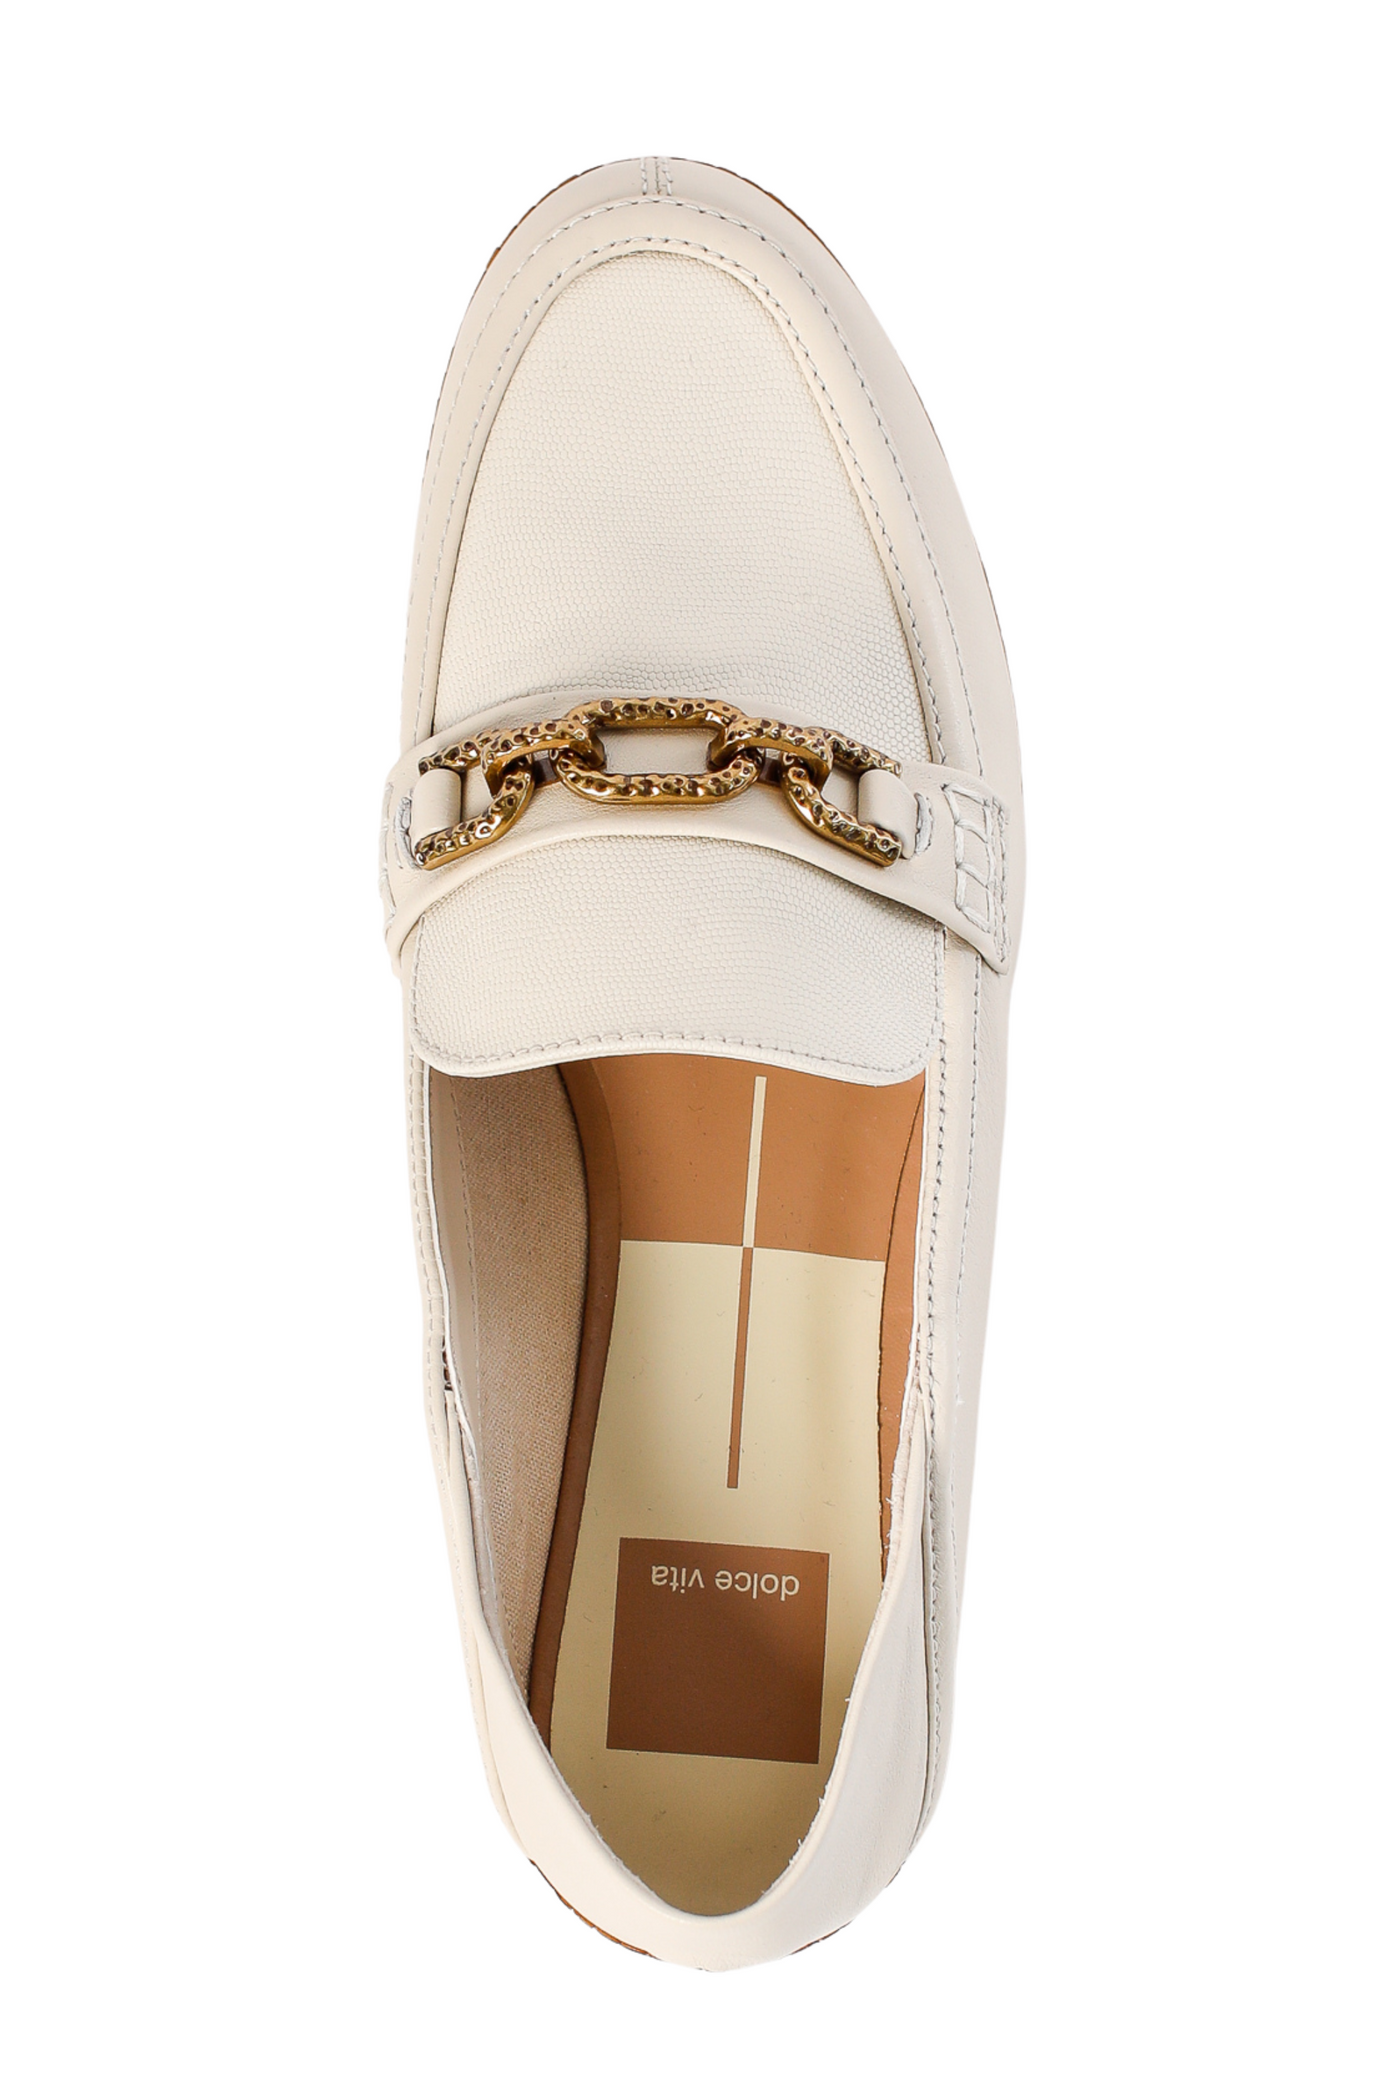 Reign Flats by Dolce Vita